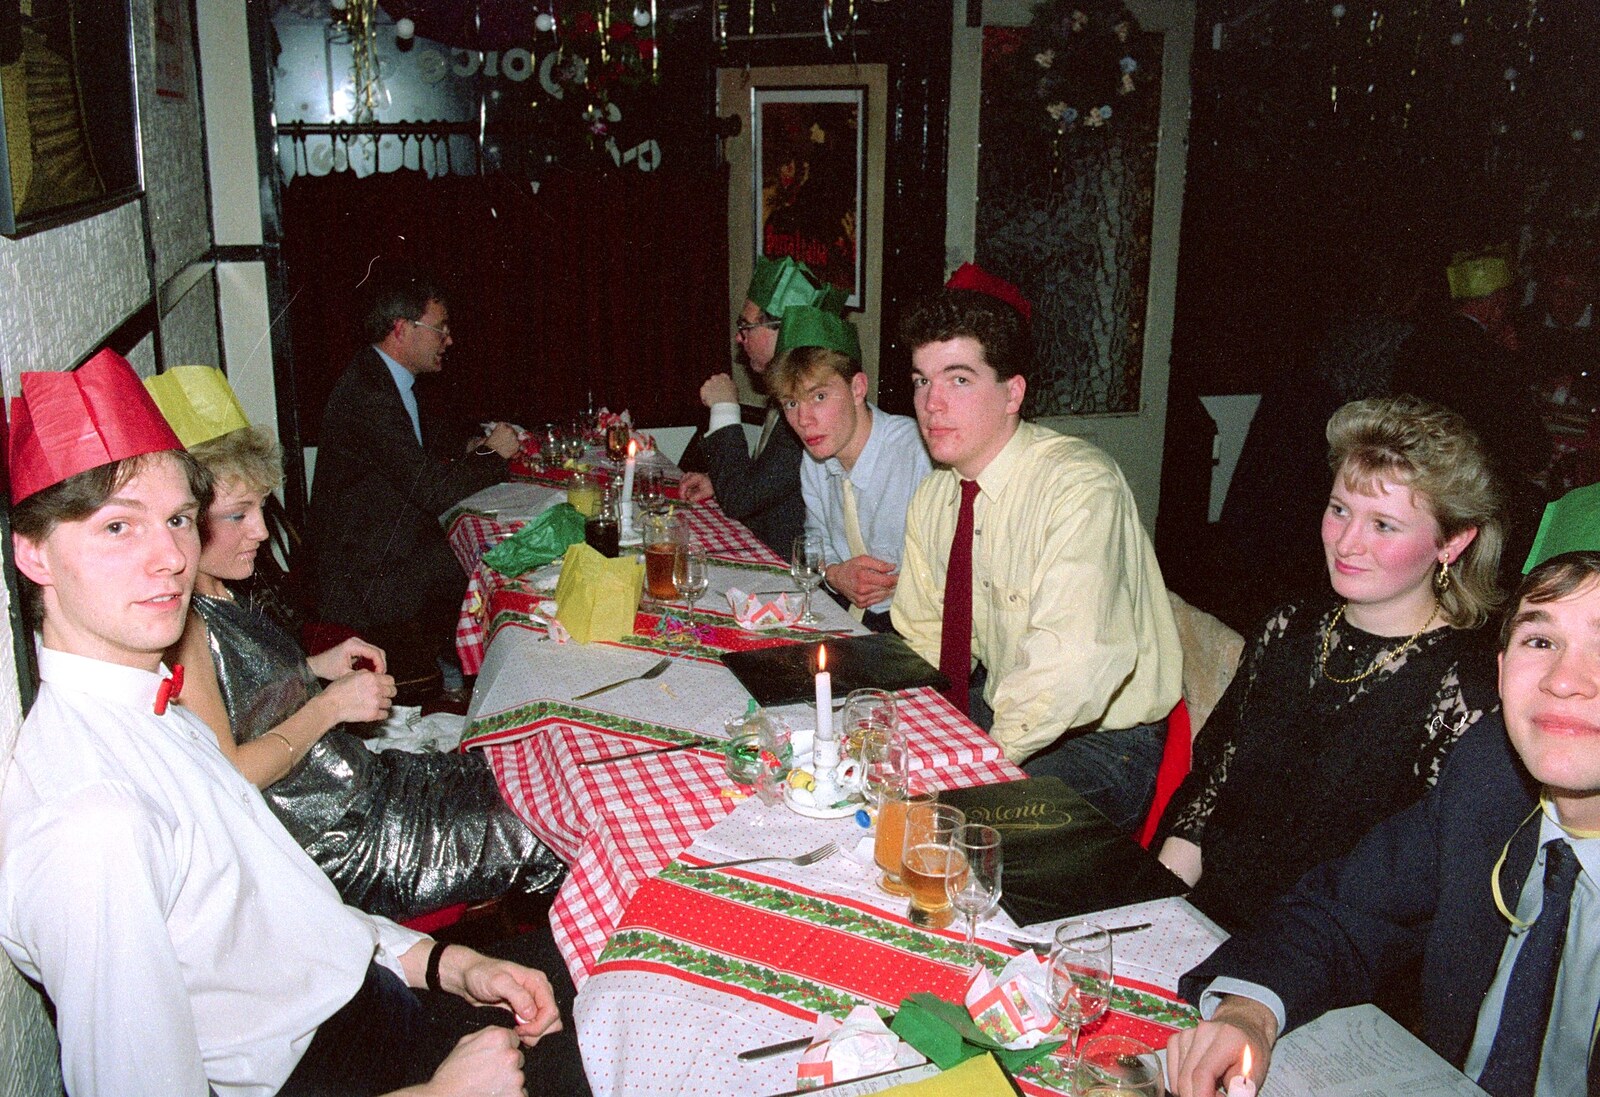 Sean, Stephen, Jon, Maria and Phil from Hamish's 21st and Christmas, New Milton and Bransgore - 25th December 1987